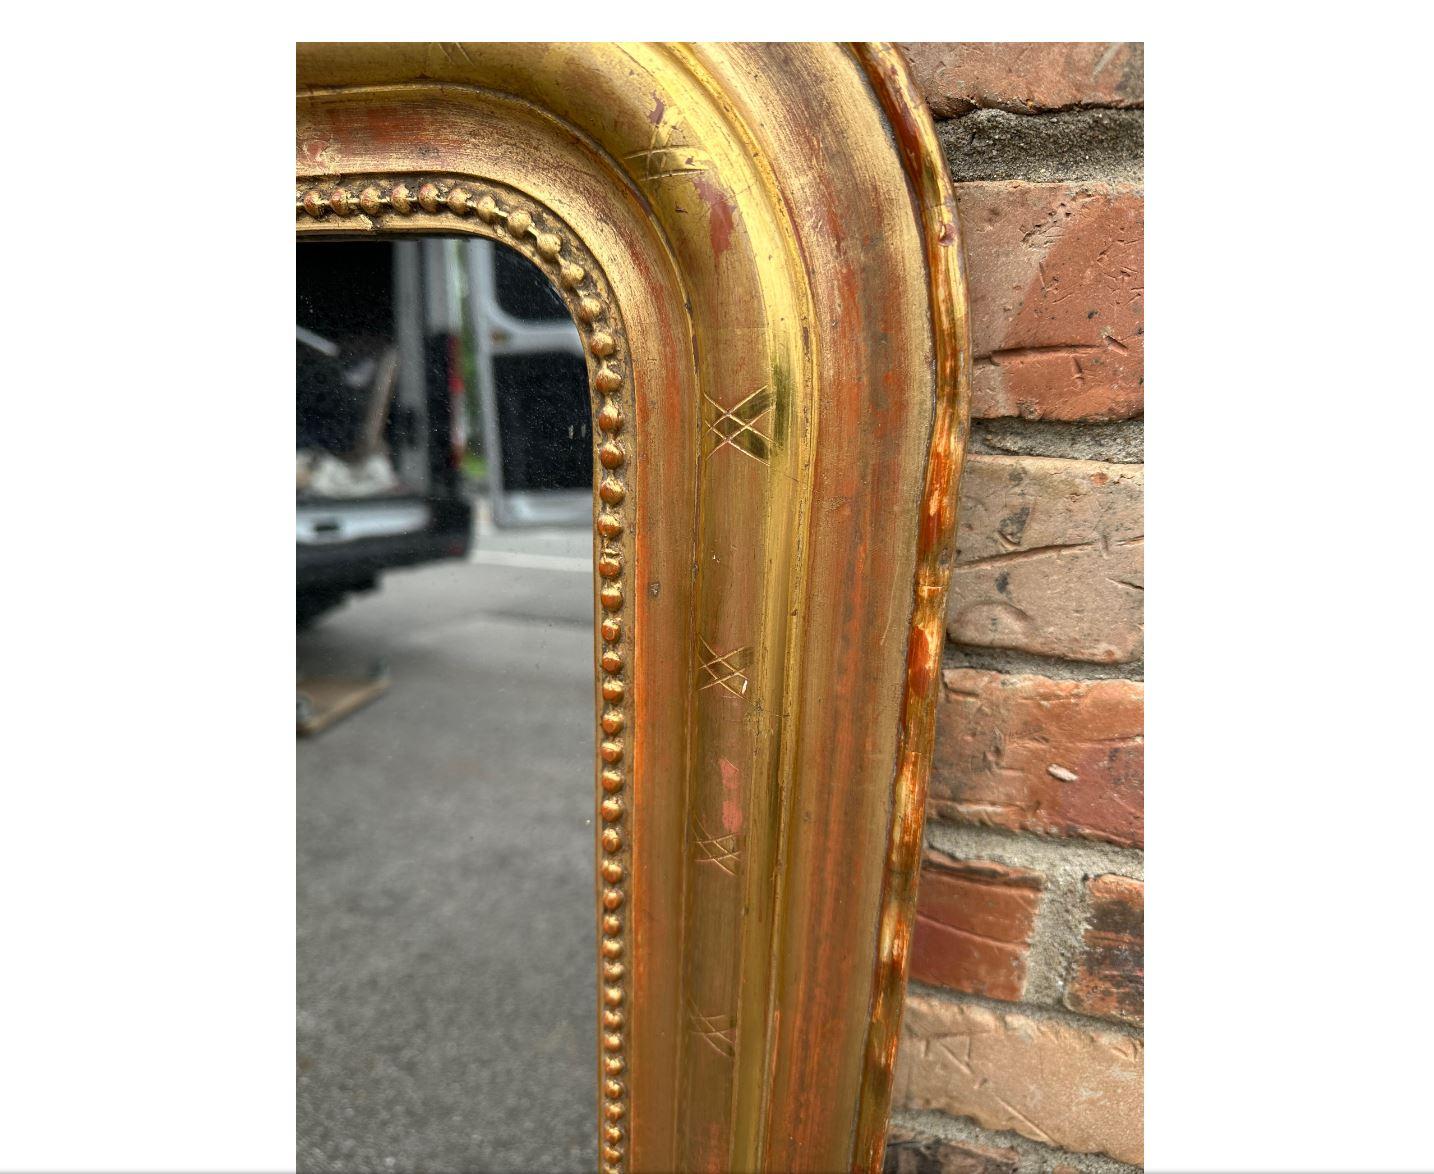 This is a gorgeous 19th century Louis Philippe mirror. The mirror has a beautiful gold beaded design on the inner border, as well as hand carved designing along the border as well.
This mirror also has a unique scalloped outside edge that is not